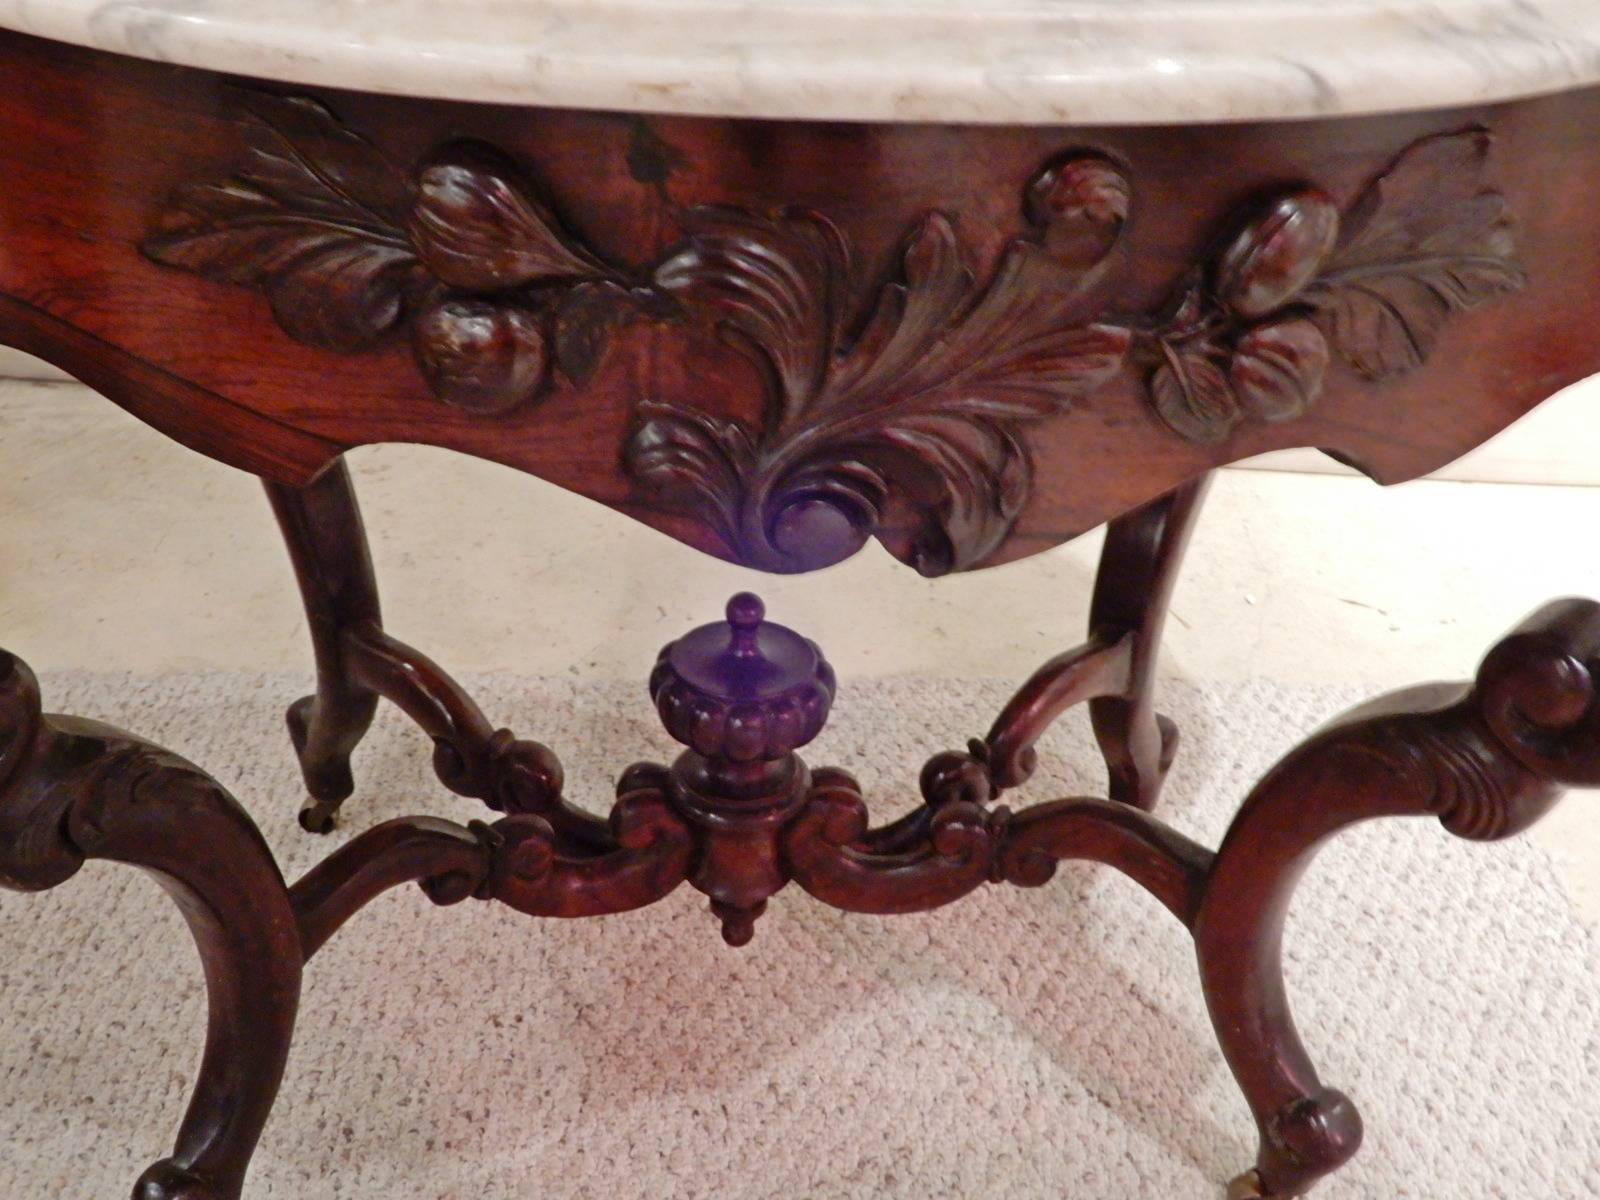 A John Henry Belter Victorian rosewood Rococo Revival centre table. Belter furniture can be seen in most major American Museums. The rosewood Belter table is carved with fruit, vines leaves and flowers, all topped by a white marble top. The S curved